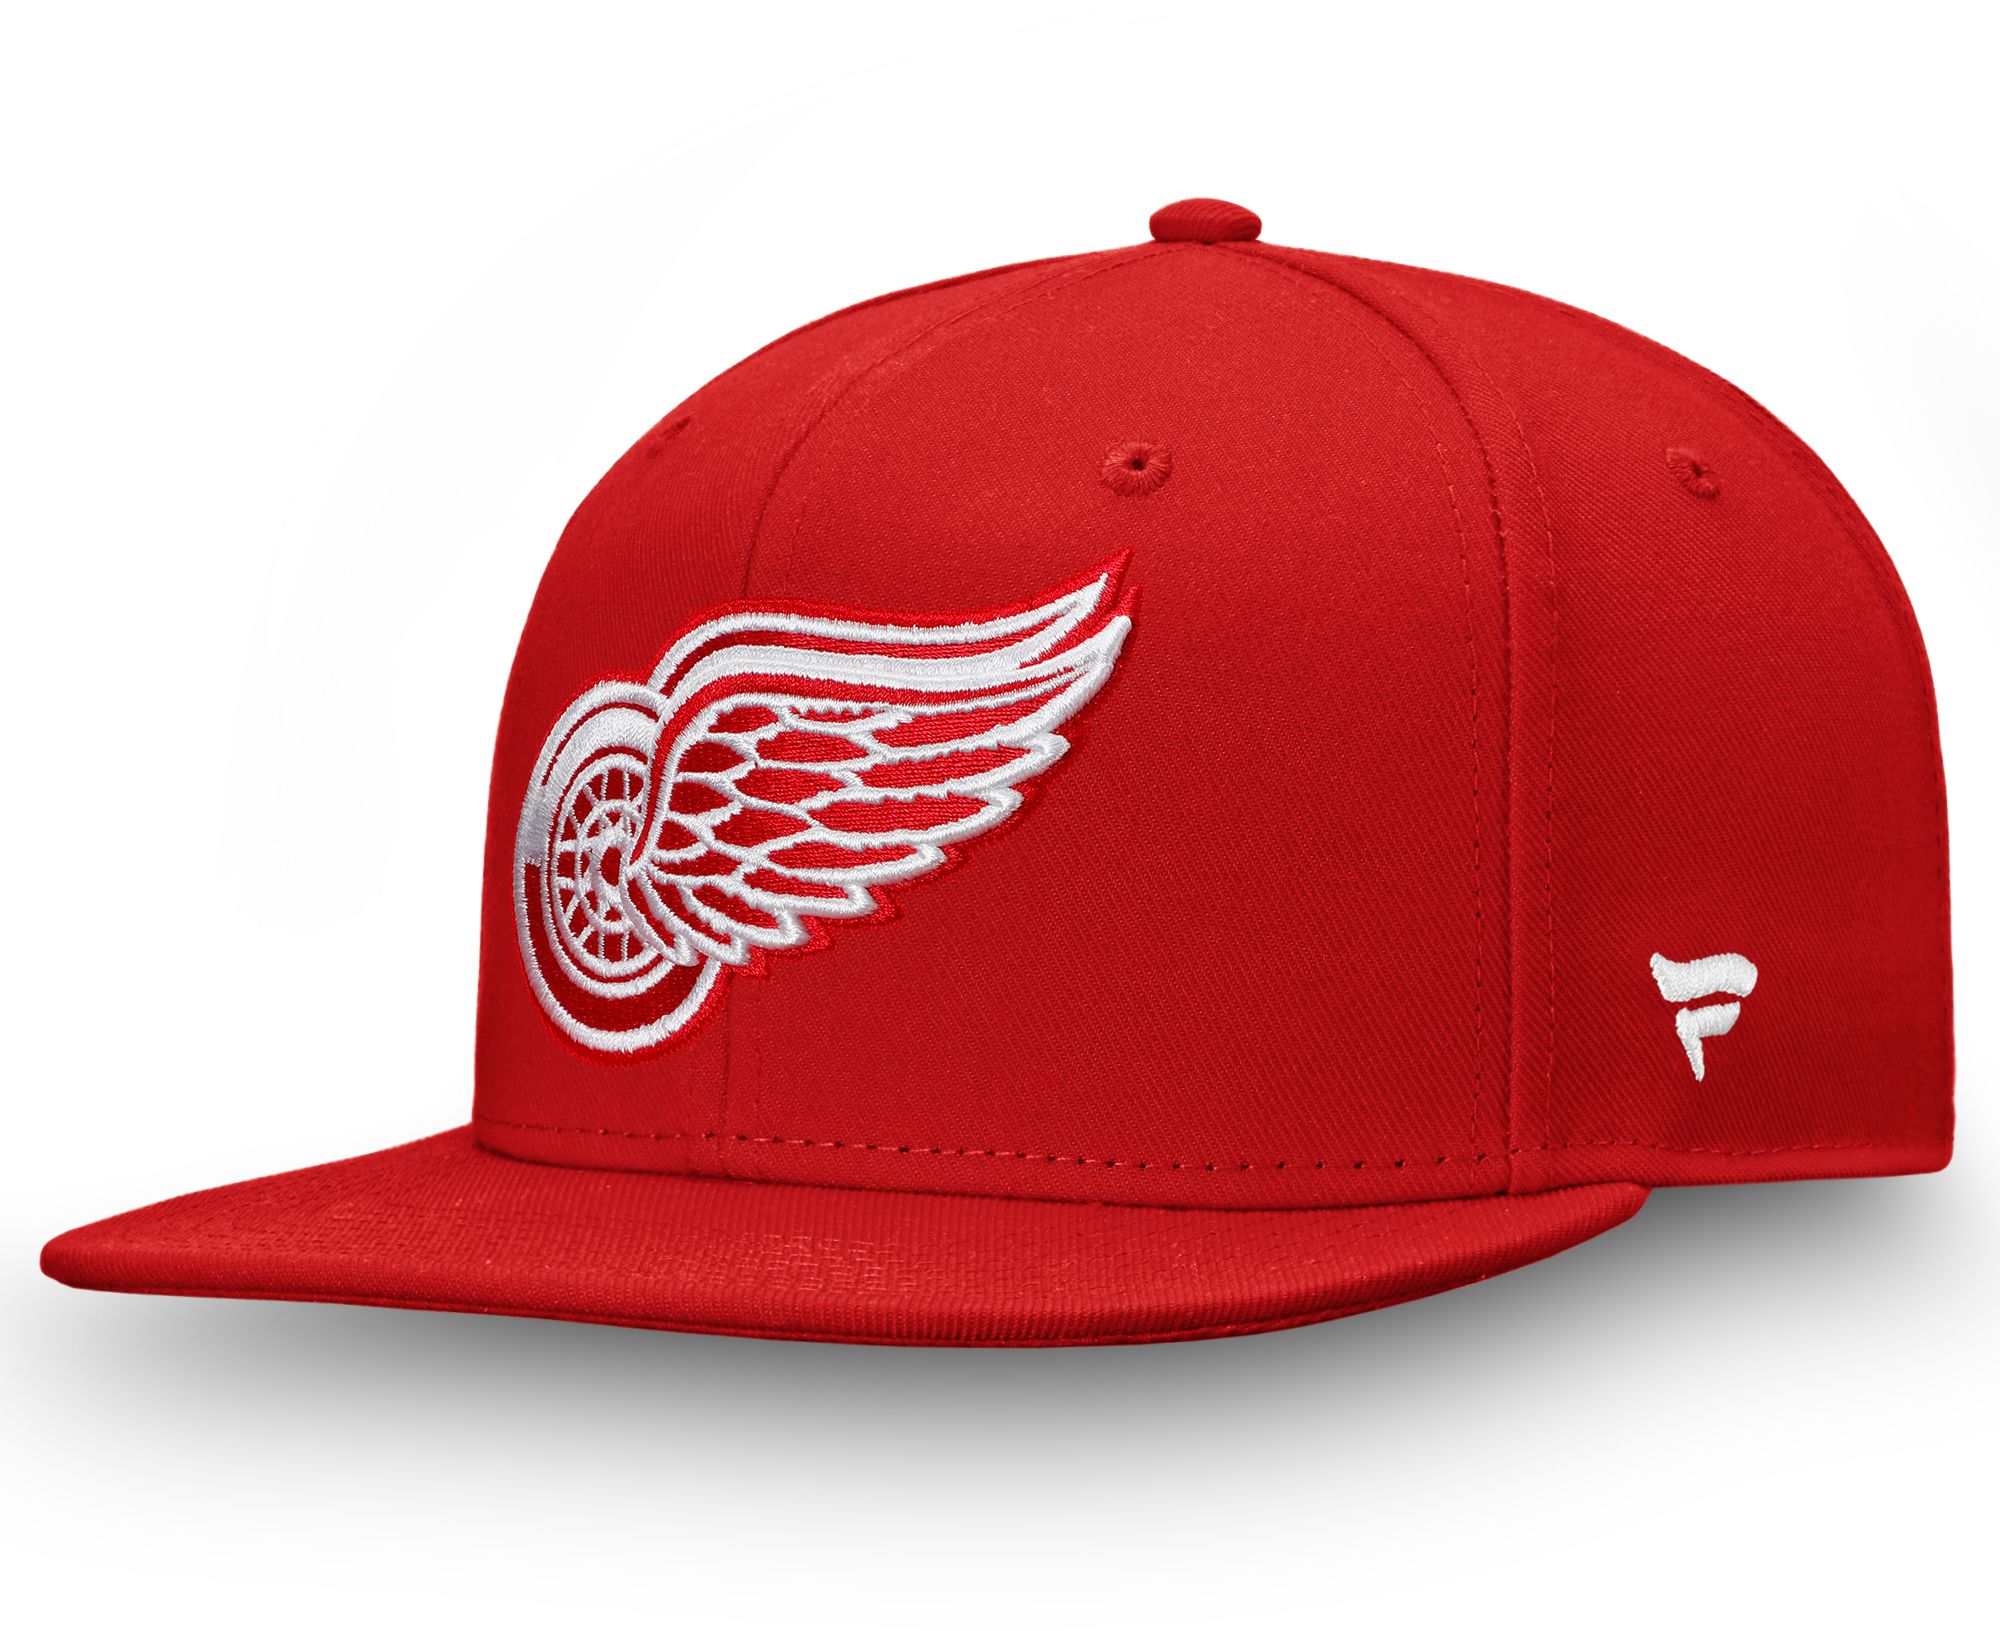 Men's Fanatics Branded Red/White Detroit Red Wings 2022 NHL Draft Authentic  Pro Flex Hat